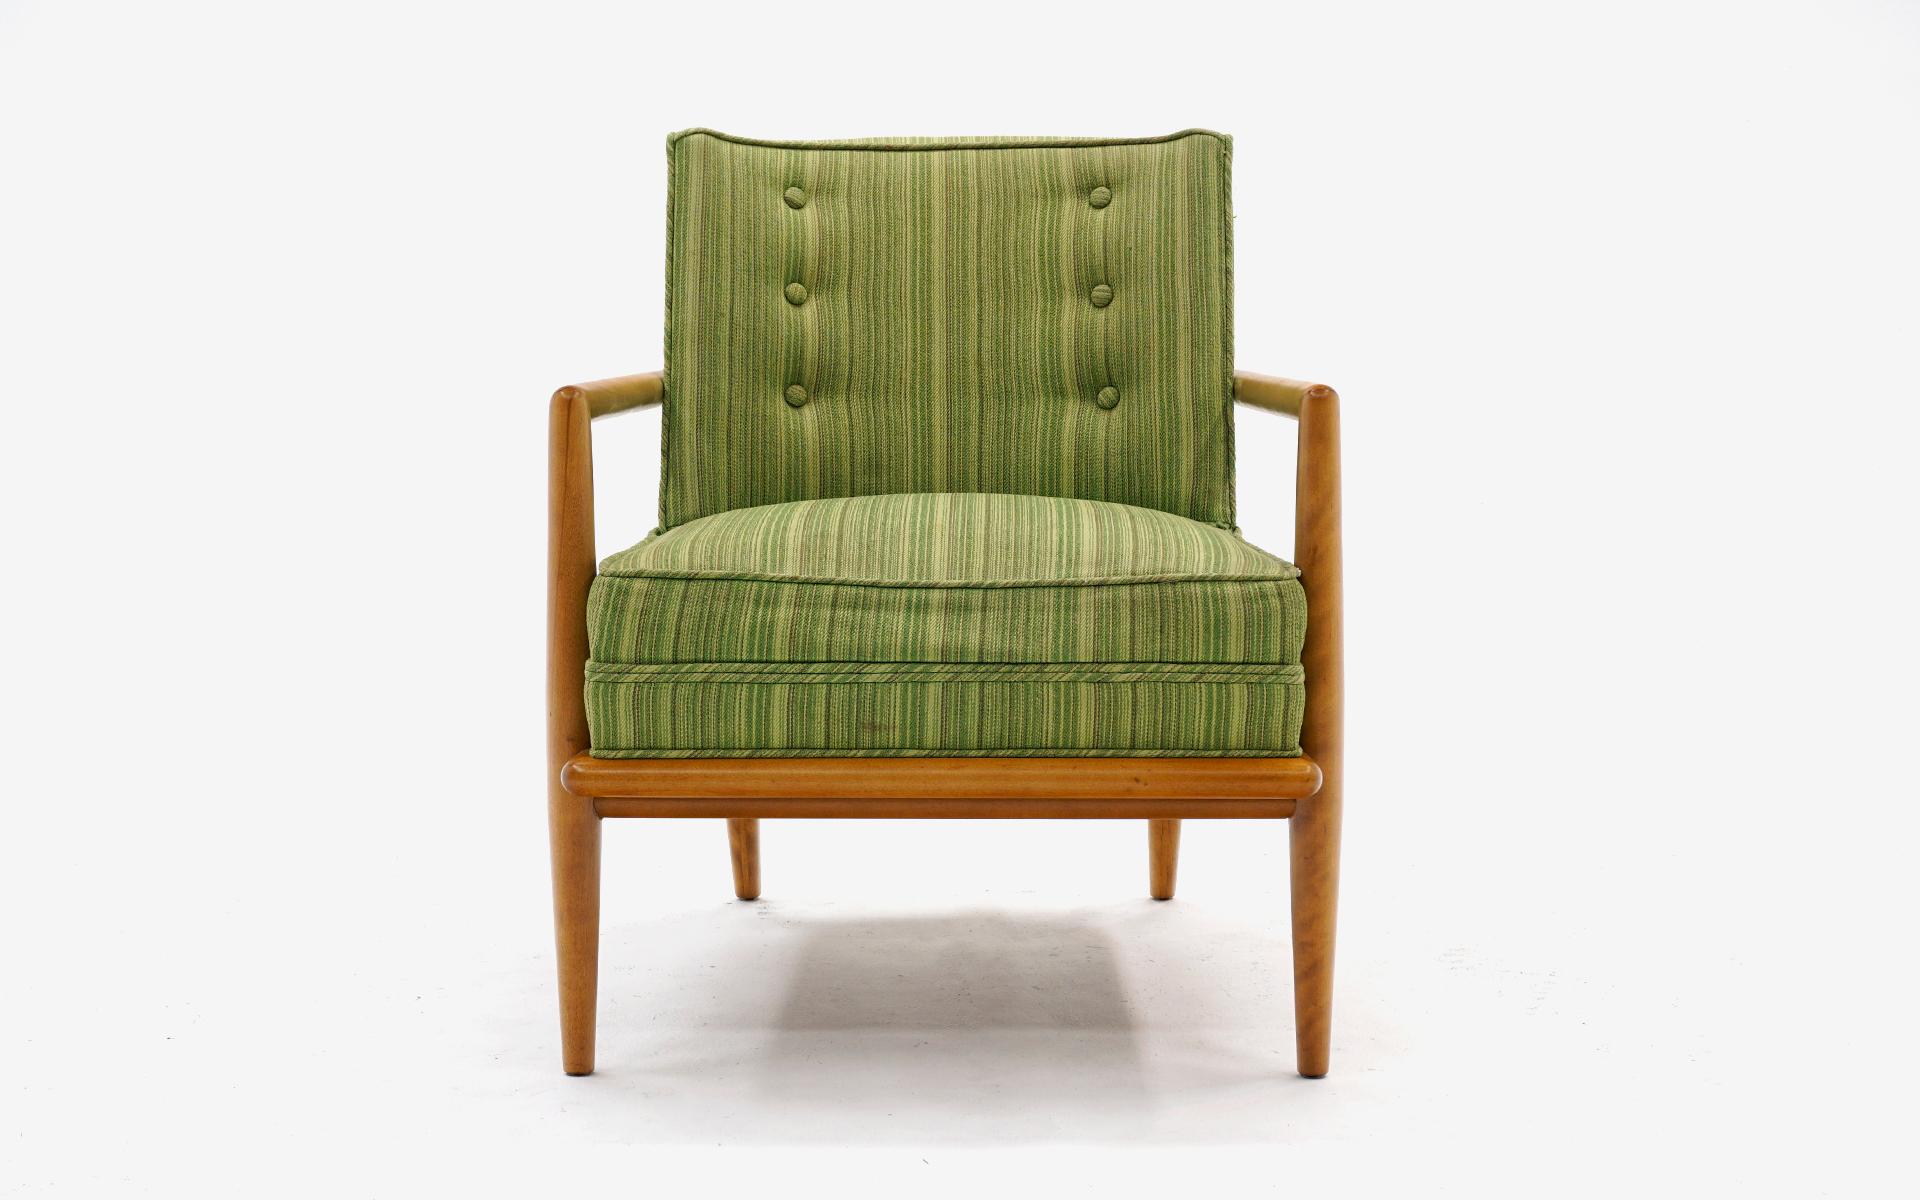 Lounge arm chair designed by T. H. Robsjohn - Gibbings for Widdicomb, 1950s. The frame has been expertly refinished and is beautiful (see photos). The upholstery is original and we recommend updating. We have it priced accordingly. The seat and back